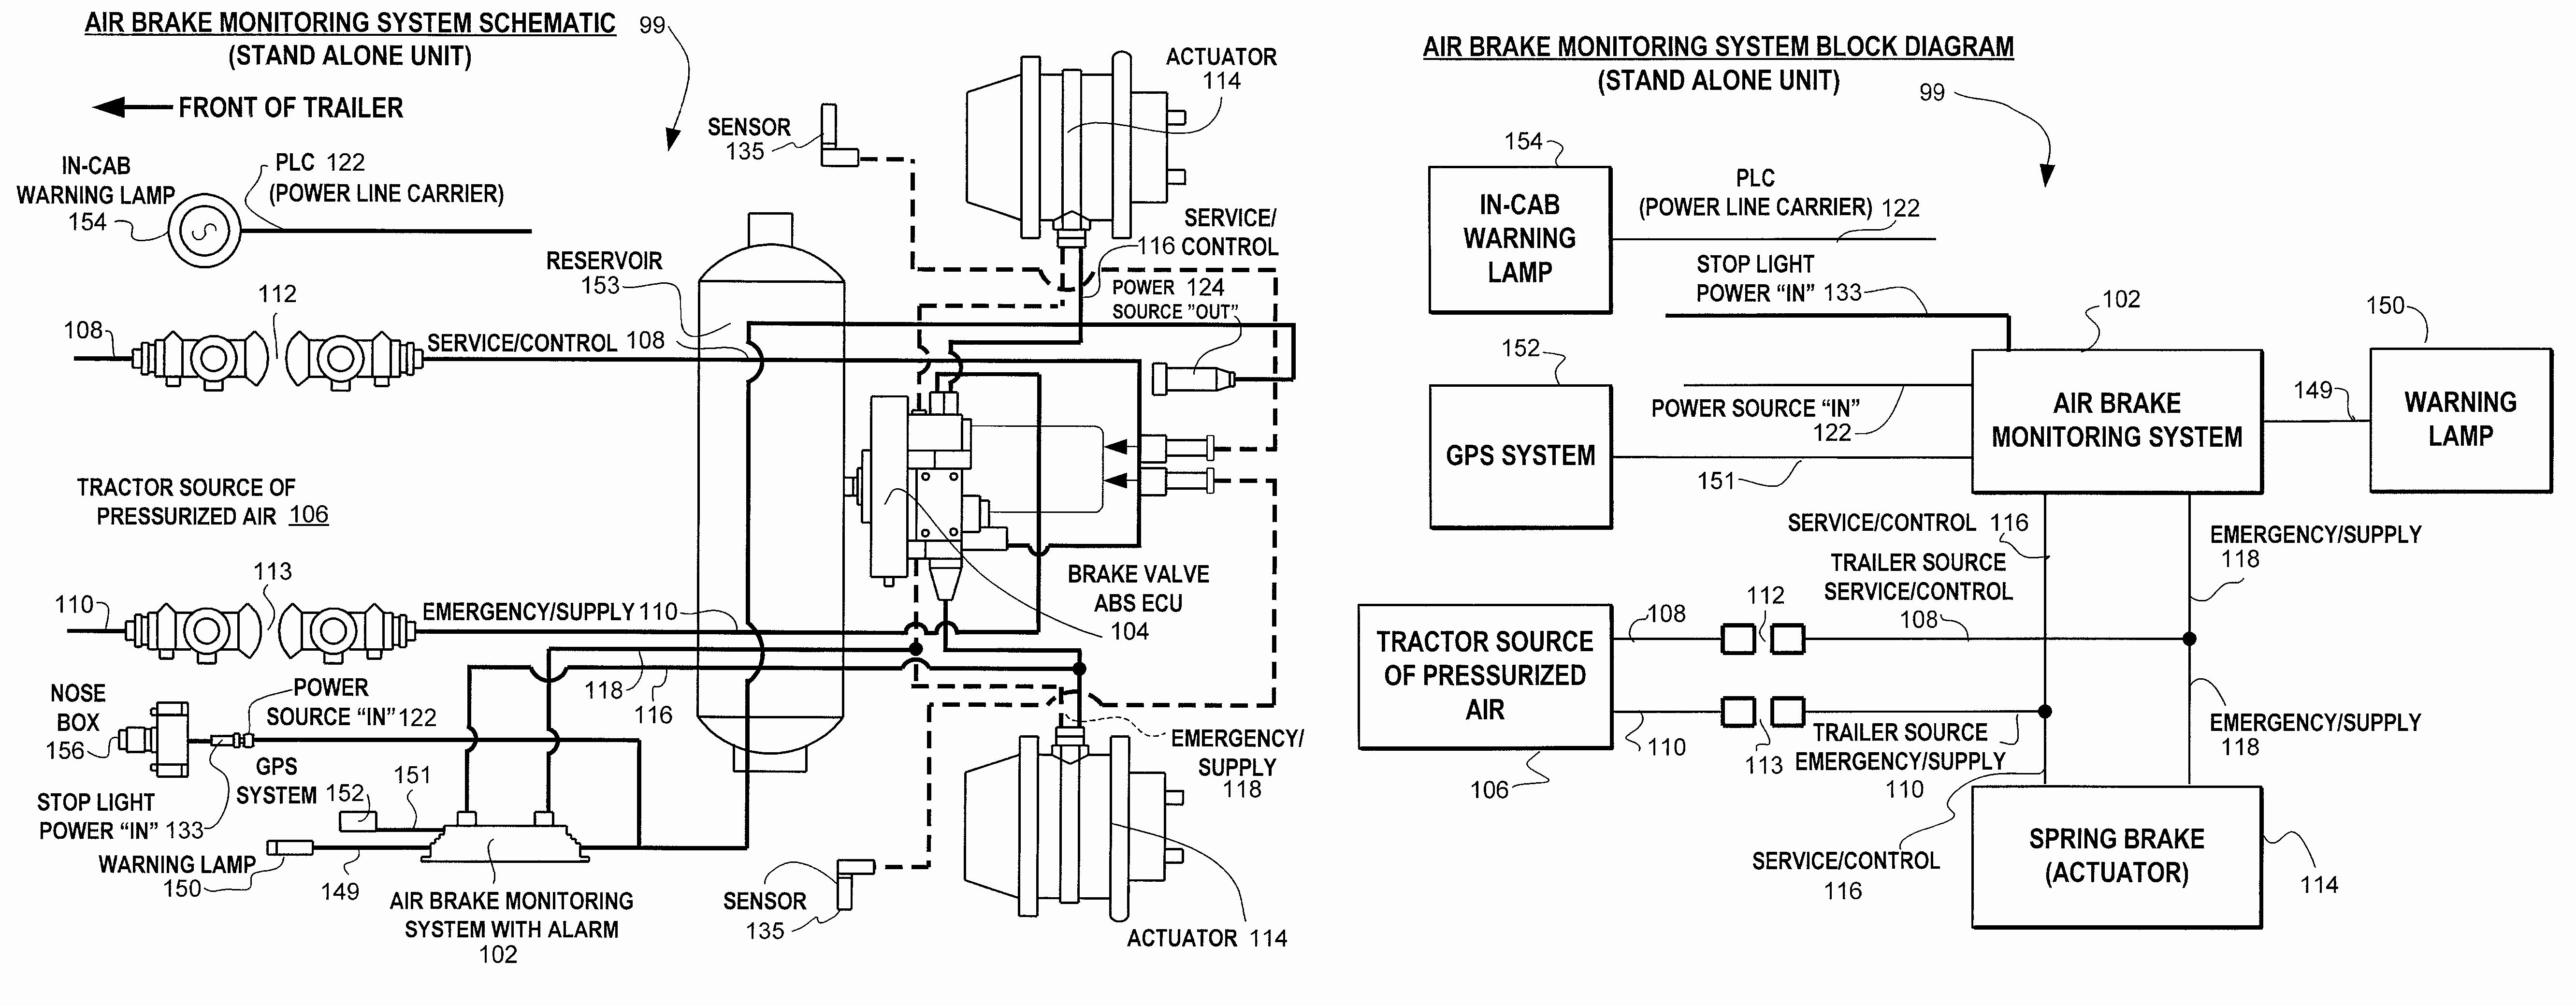 wiring diagram for wabco abs refrence wabco trailer abs codes as of wabco abs wiring diagram